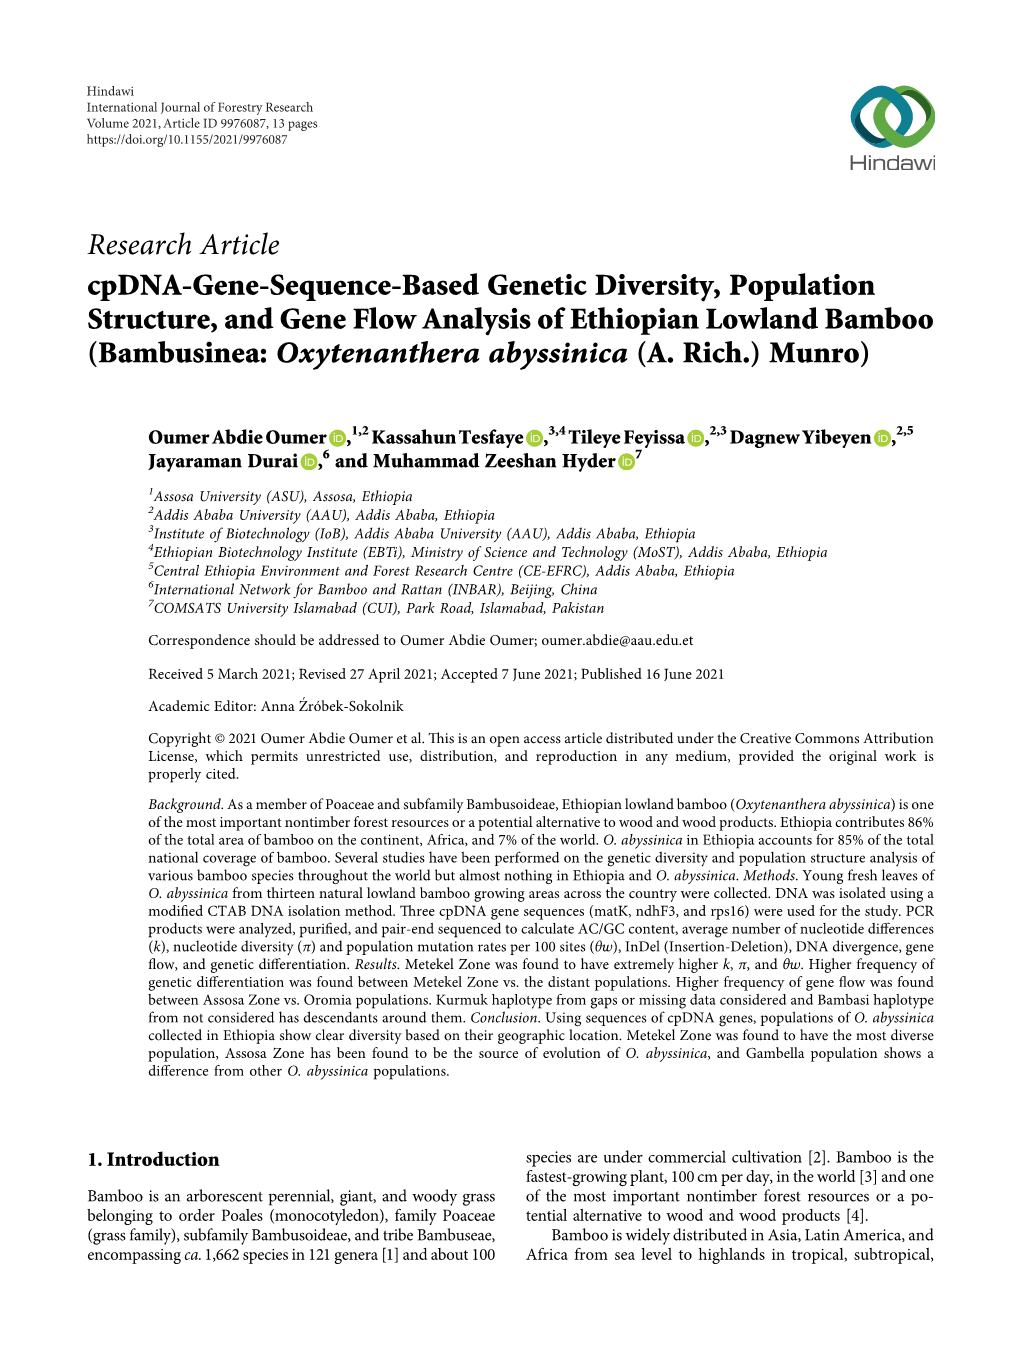 Cpdna-Gene-Sequence-Based Genetic Diversity, Population Structure, and Gene Flow Analysis of Ethiopian Lowland Bamboo (Bambusinea: Oxytenanthera Abyssinica (A